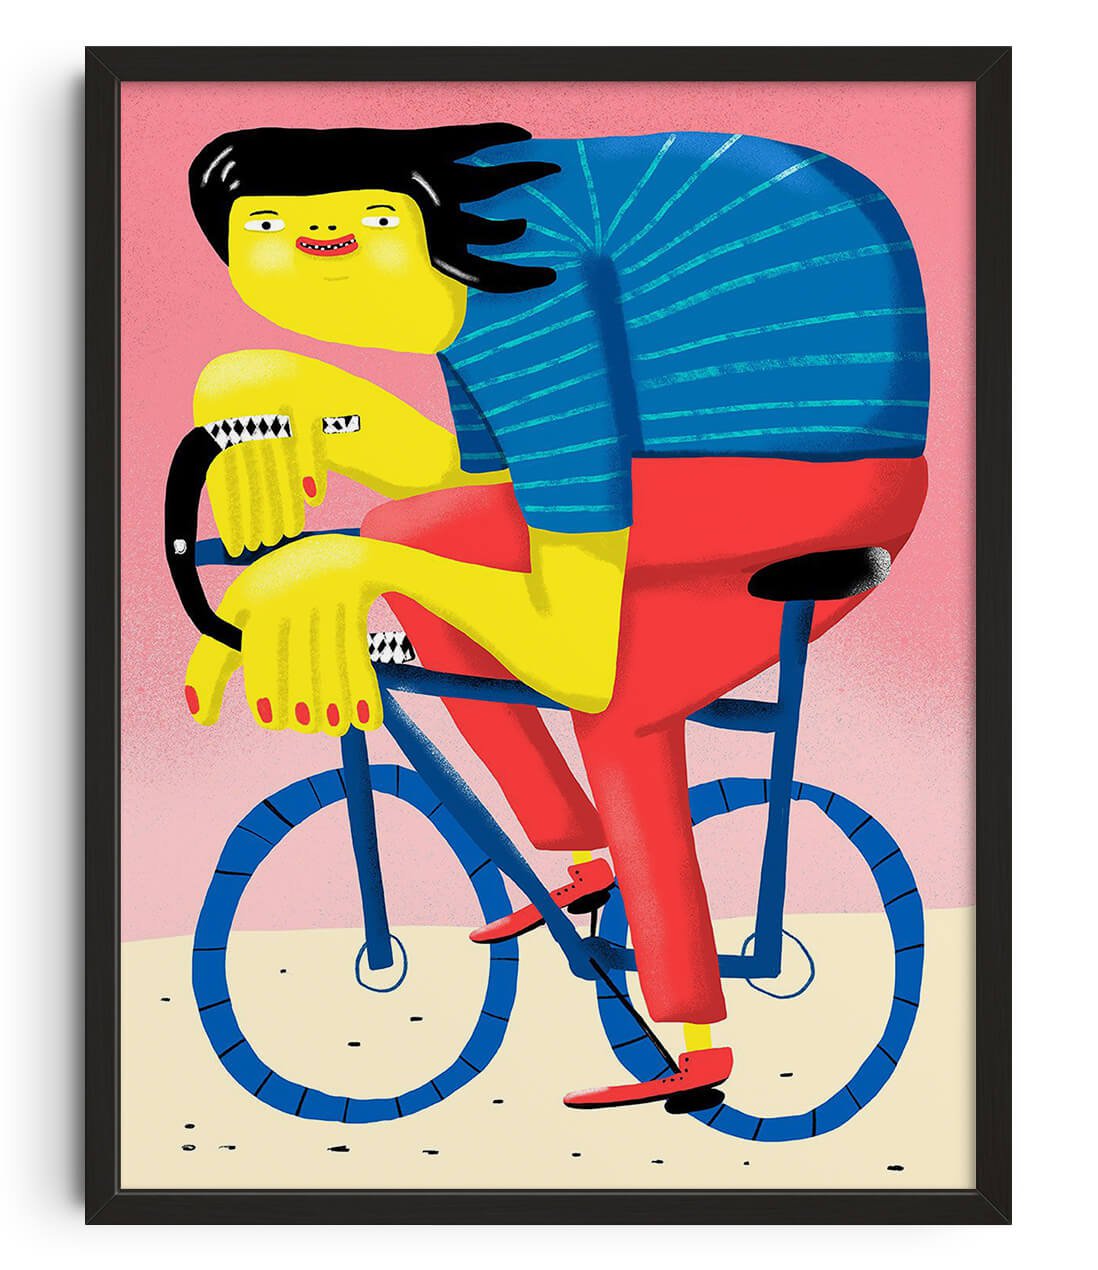 Happy Cycling contemporary wall art print by Nina Bachmann - sold by DROOL